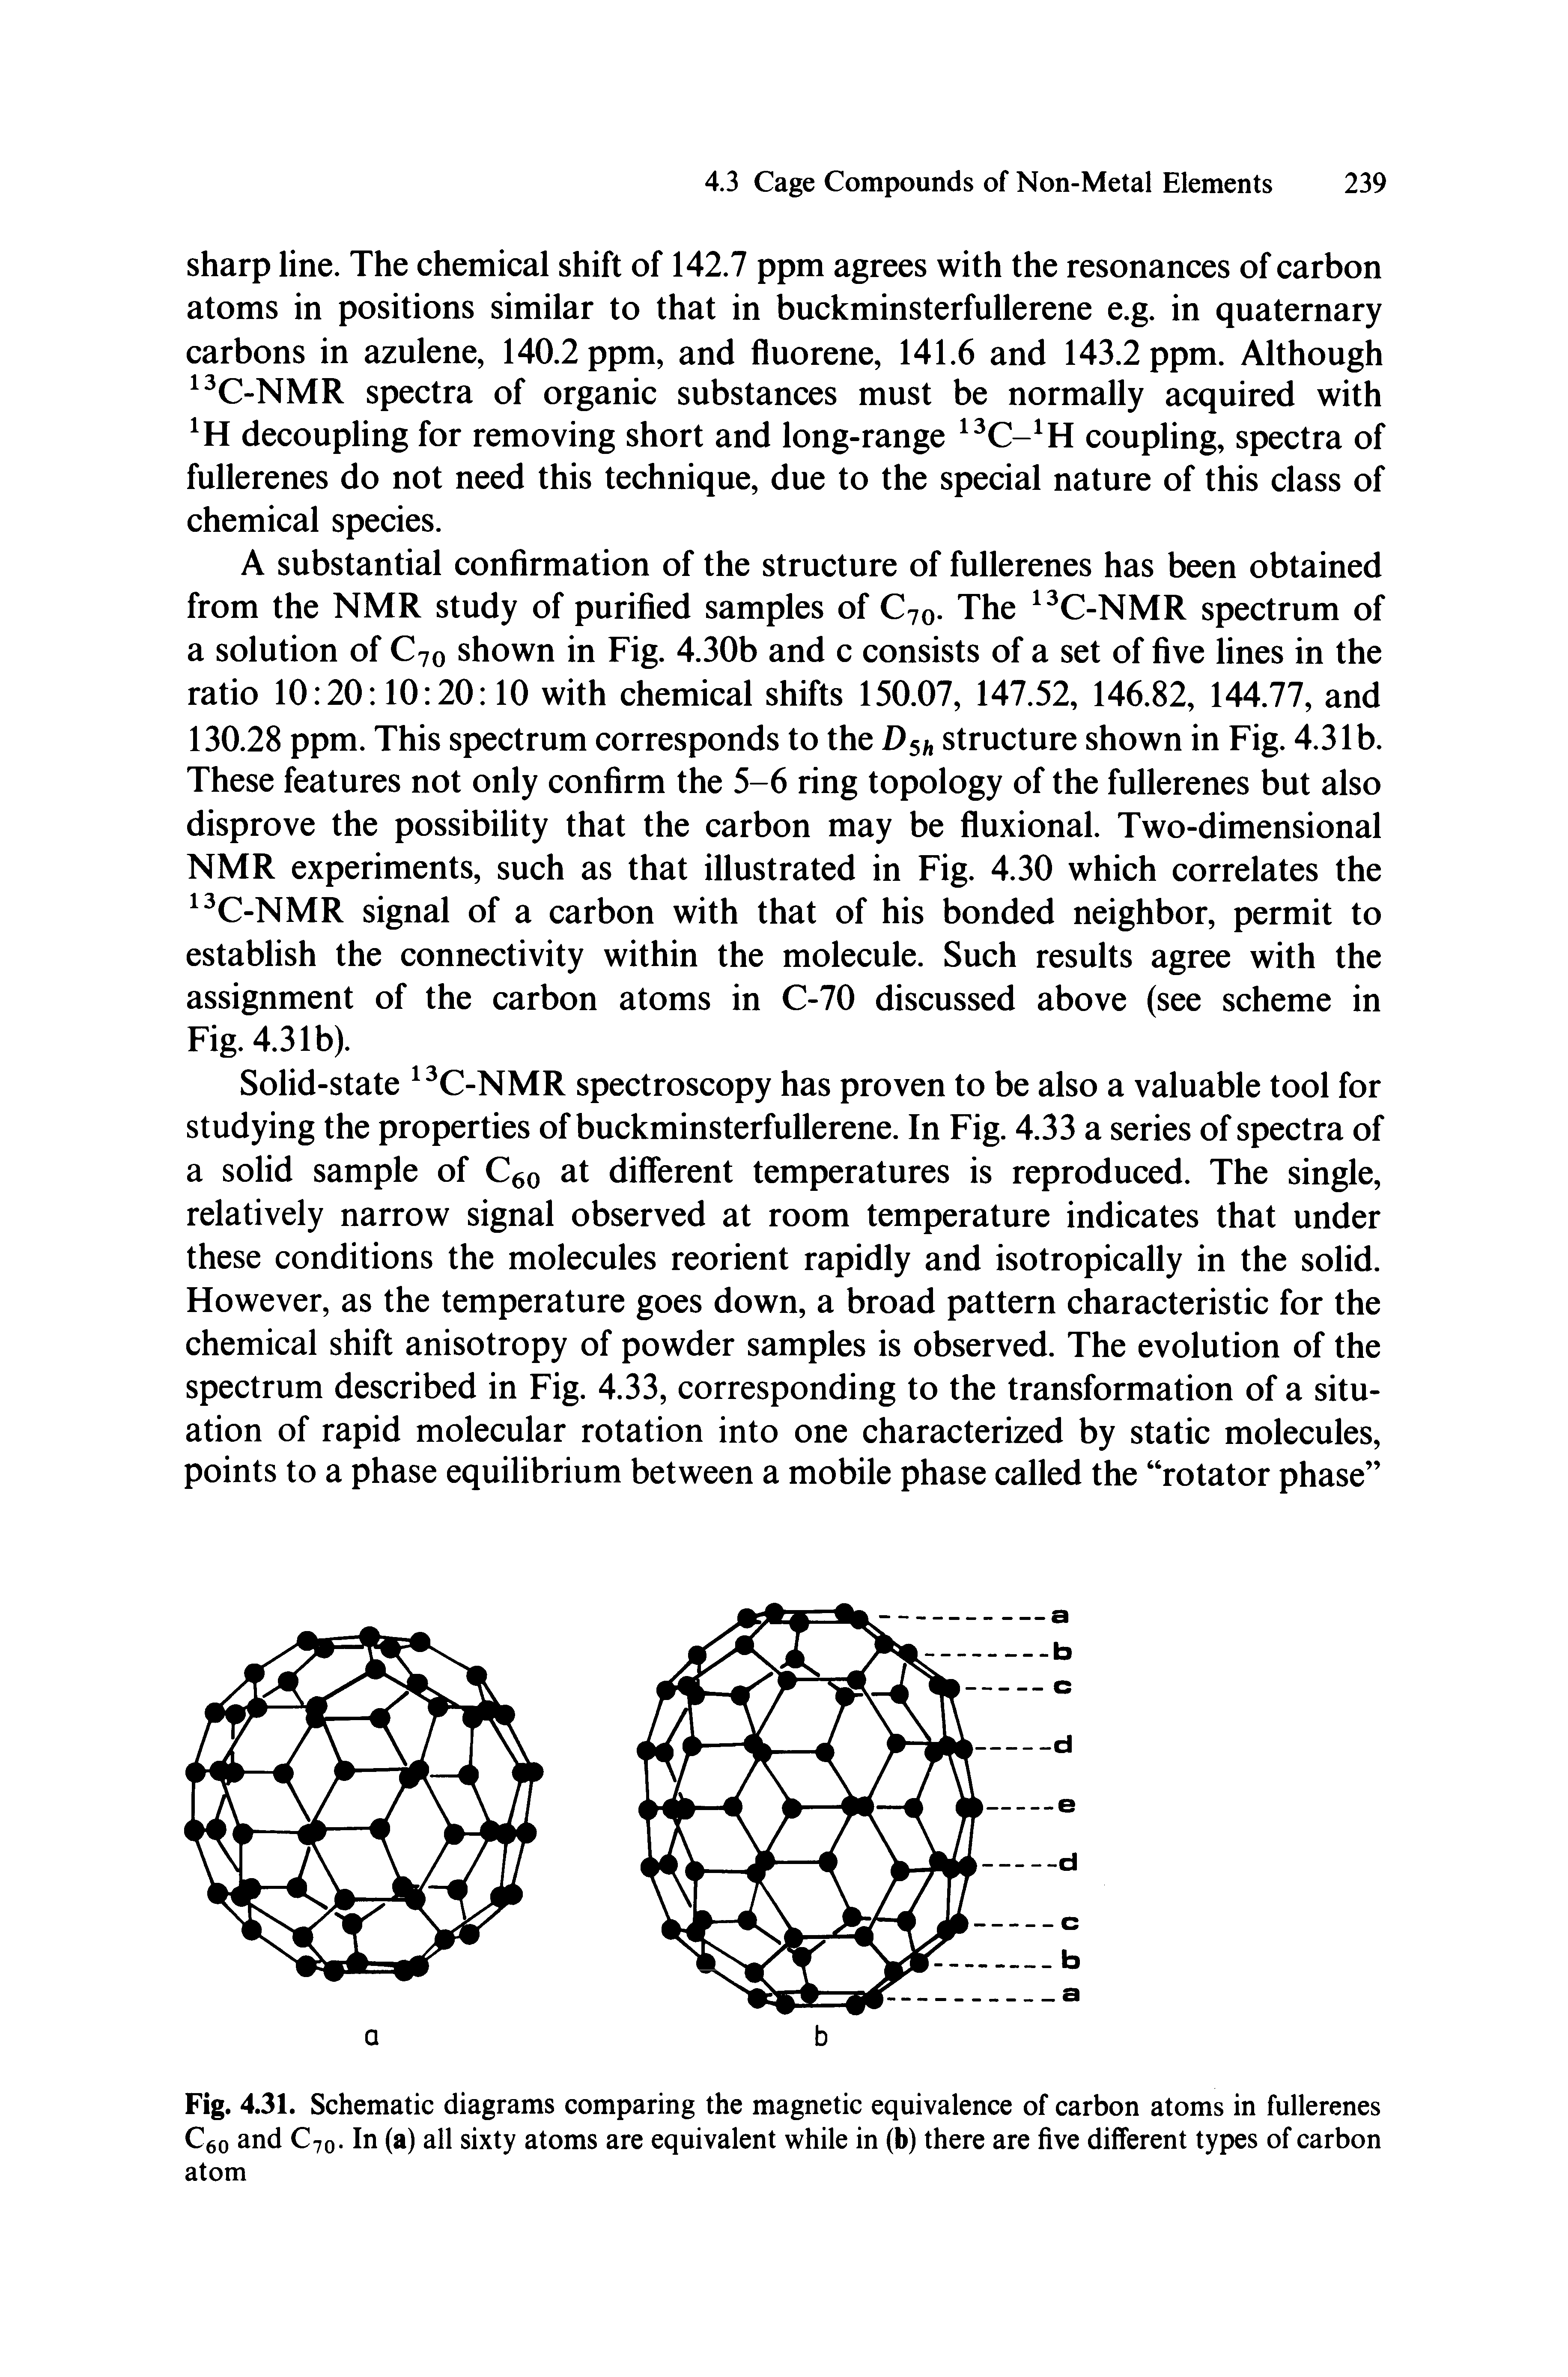 Fig. 4.31. Schematic diagrams comparing the magnetic equivalence of carbon atoms in fullerenes Cgo and C70. In (a) all sixty atoms are equivalent while in (b) there are five different types of carbon atom...